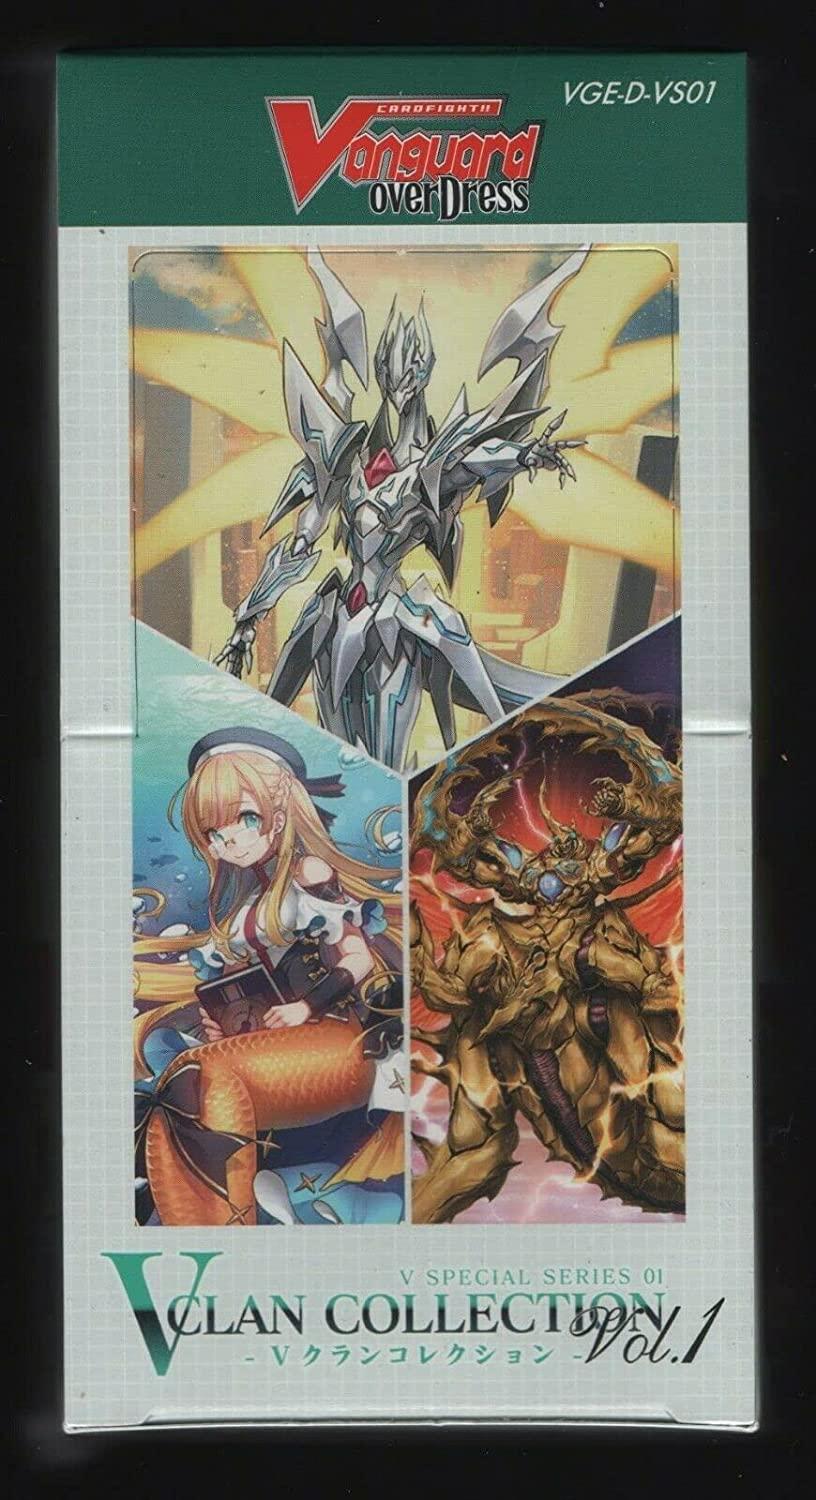 Cardfight Vanguard overDress V Special Series 01: V Clan Collection Vol. 1 Booster Pack